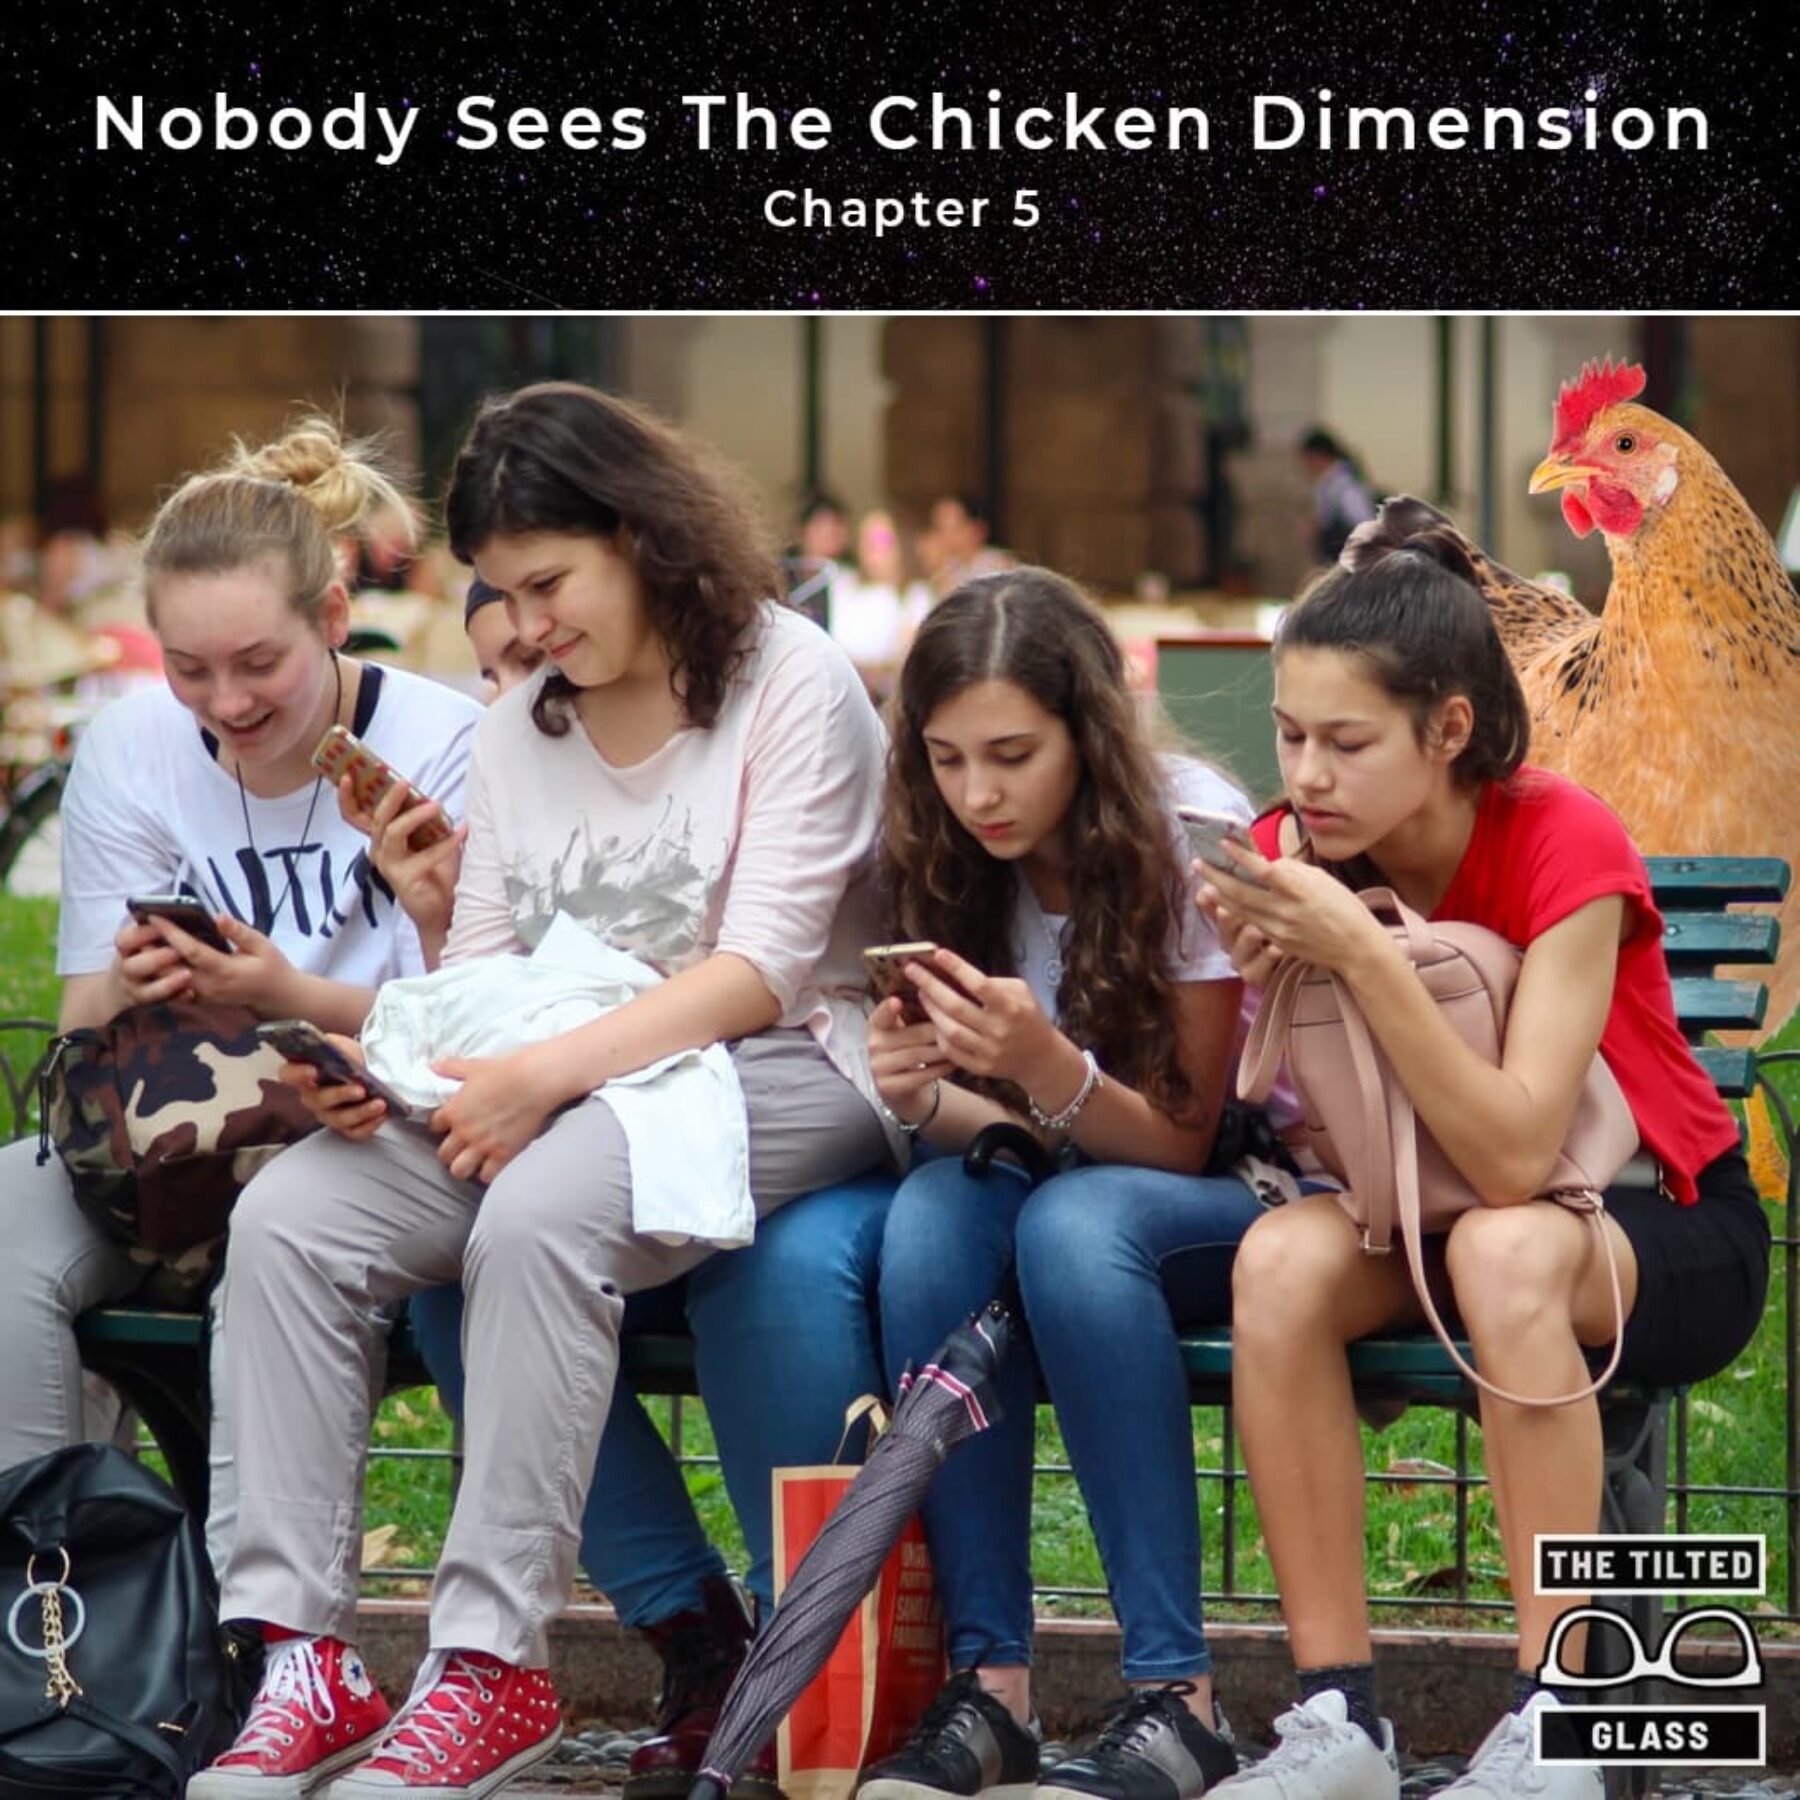 Nobody Sees The Chicken Dimension - Chapter 5 - Phone Home